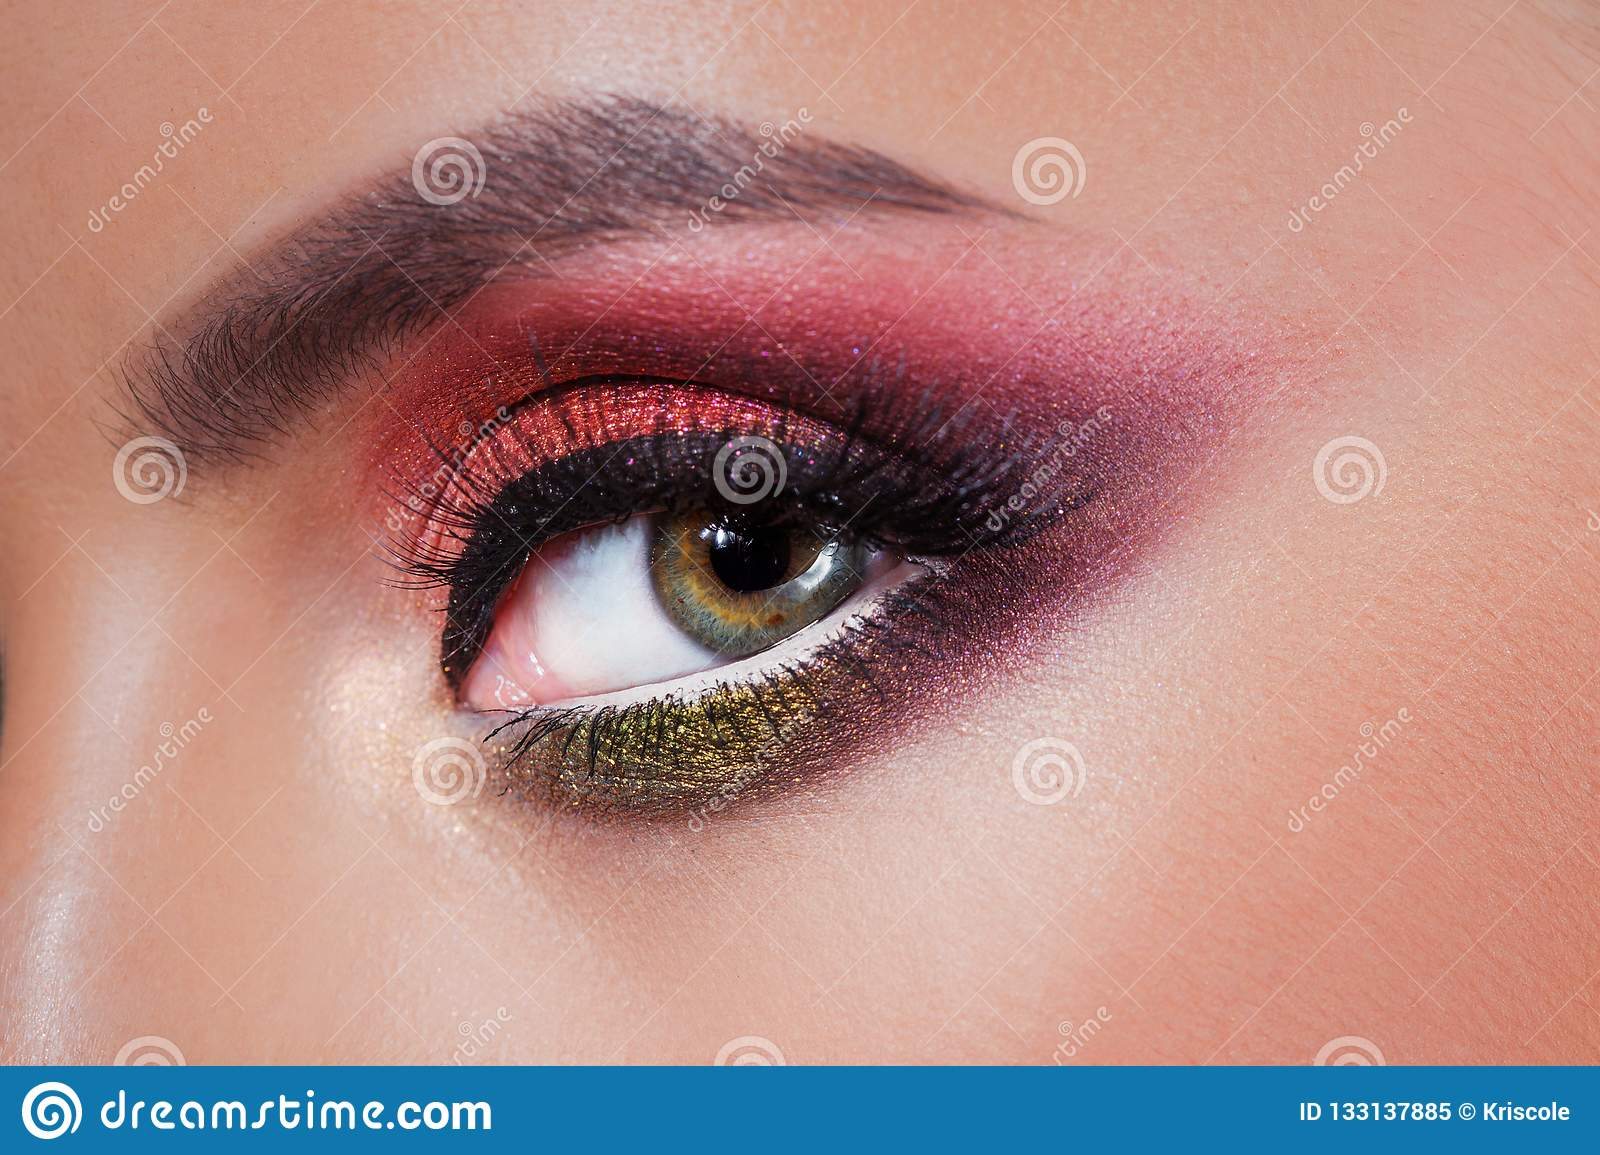 Eye Makeup Shades Amazing Bright Eye Makeup In Luxurious Scarlet Shades Pink And Blue